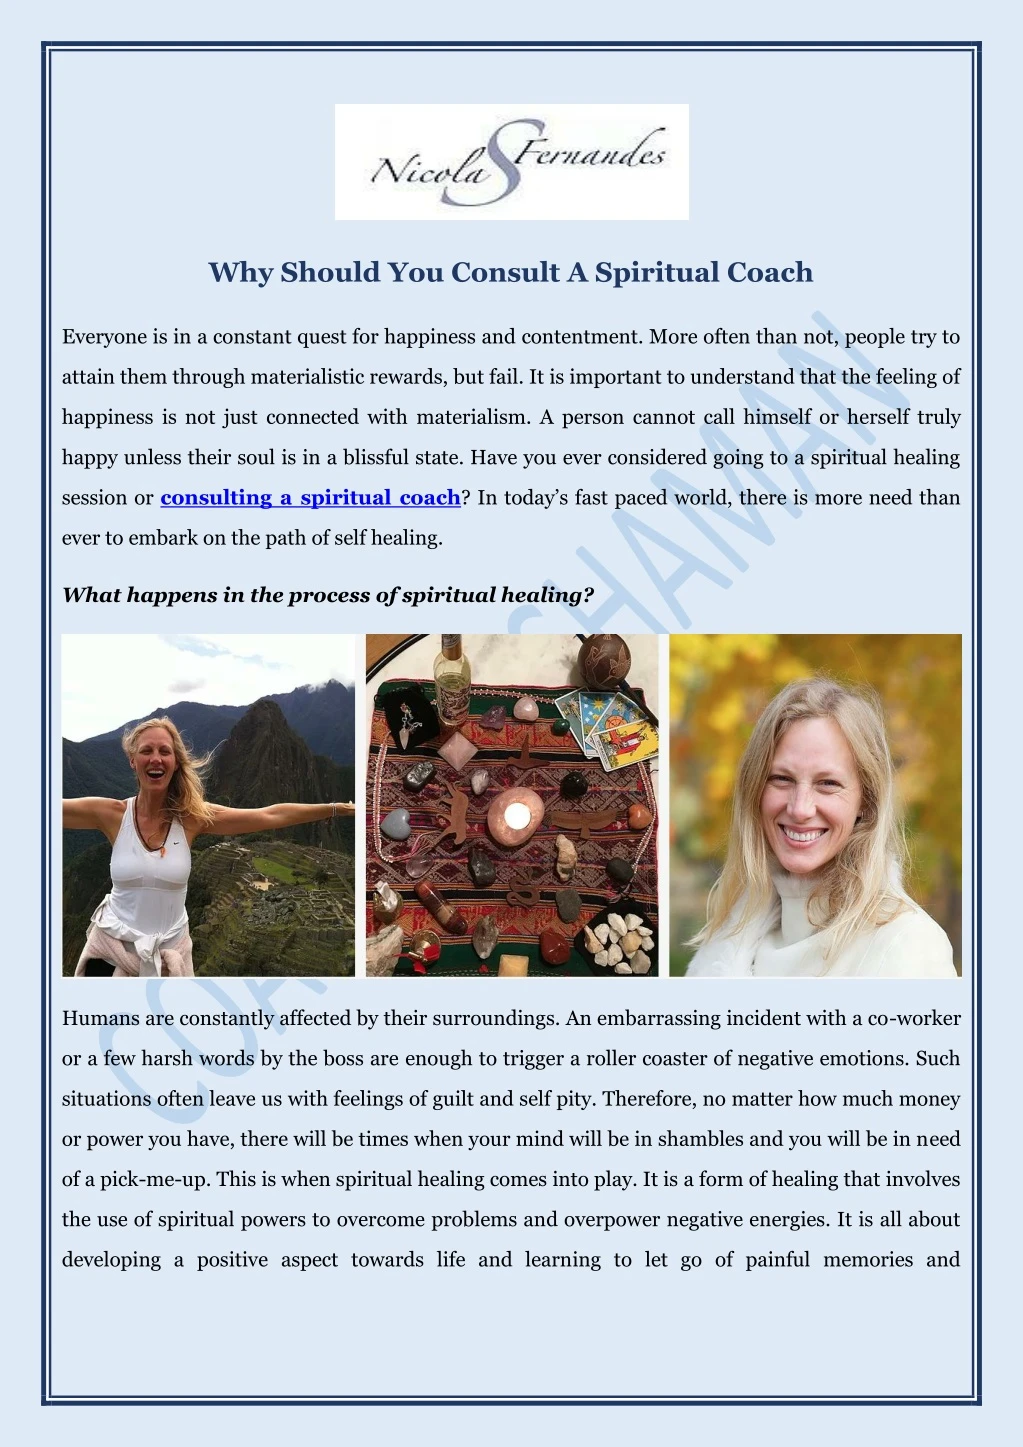 why should you consult a spiritual coach